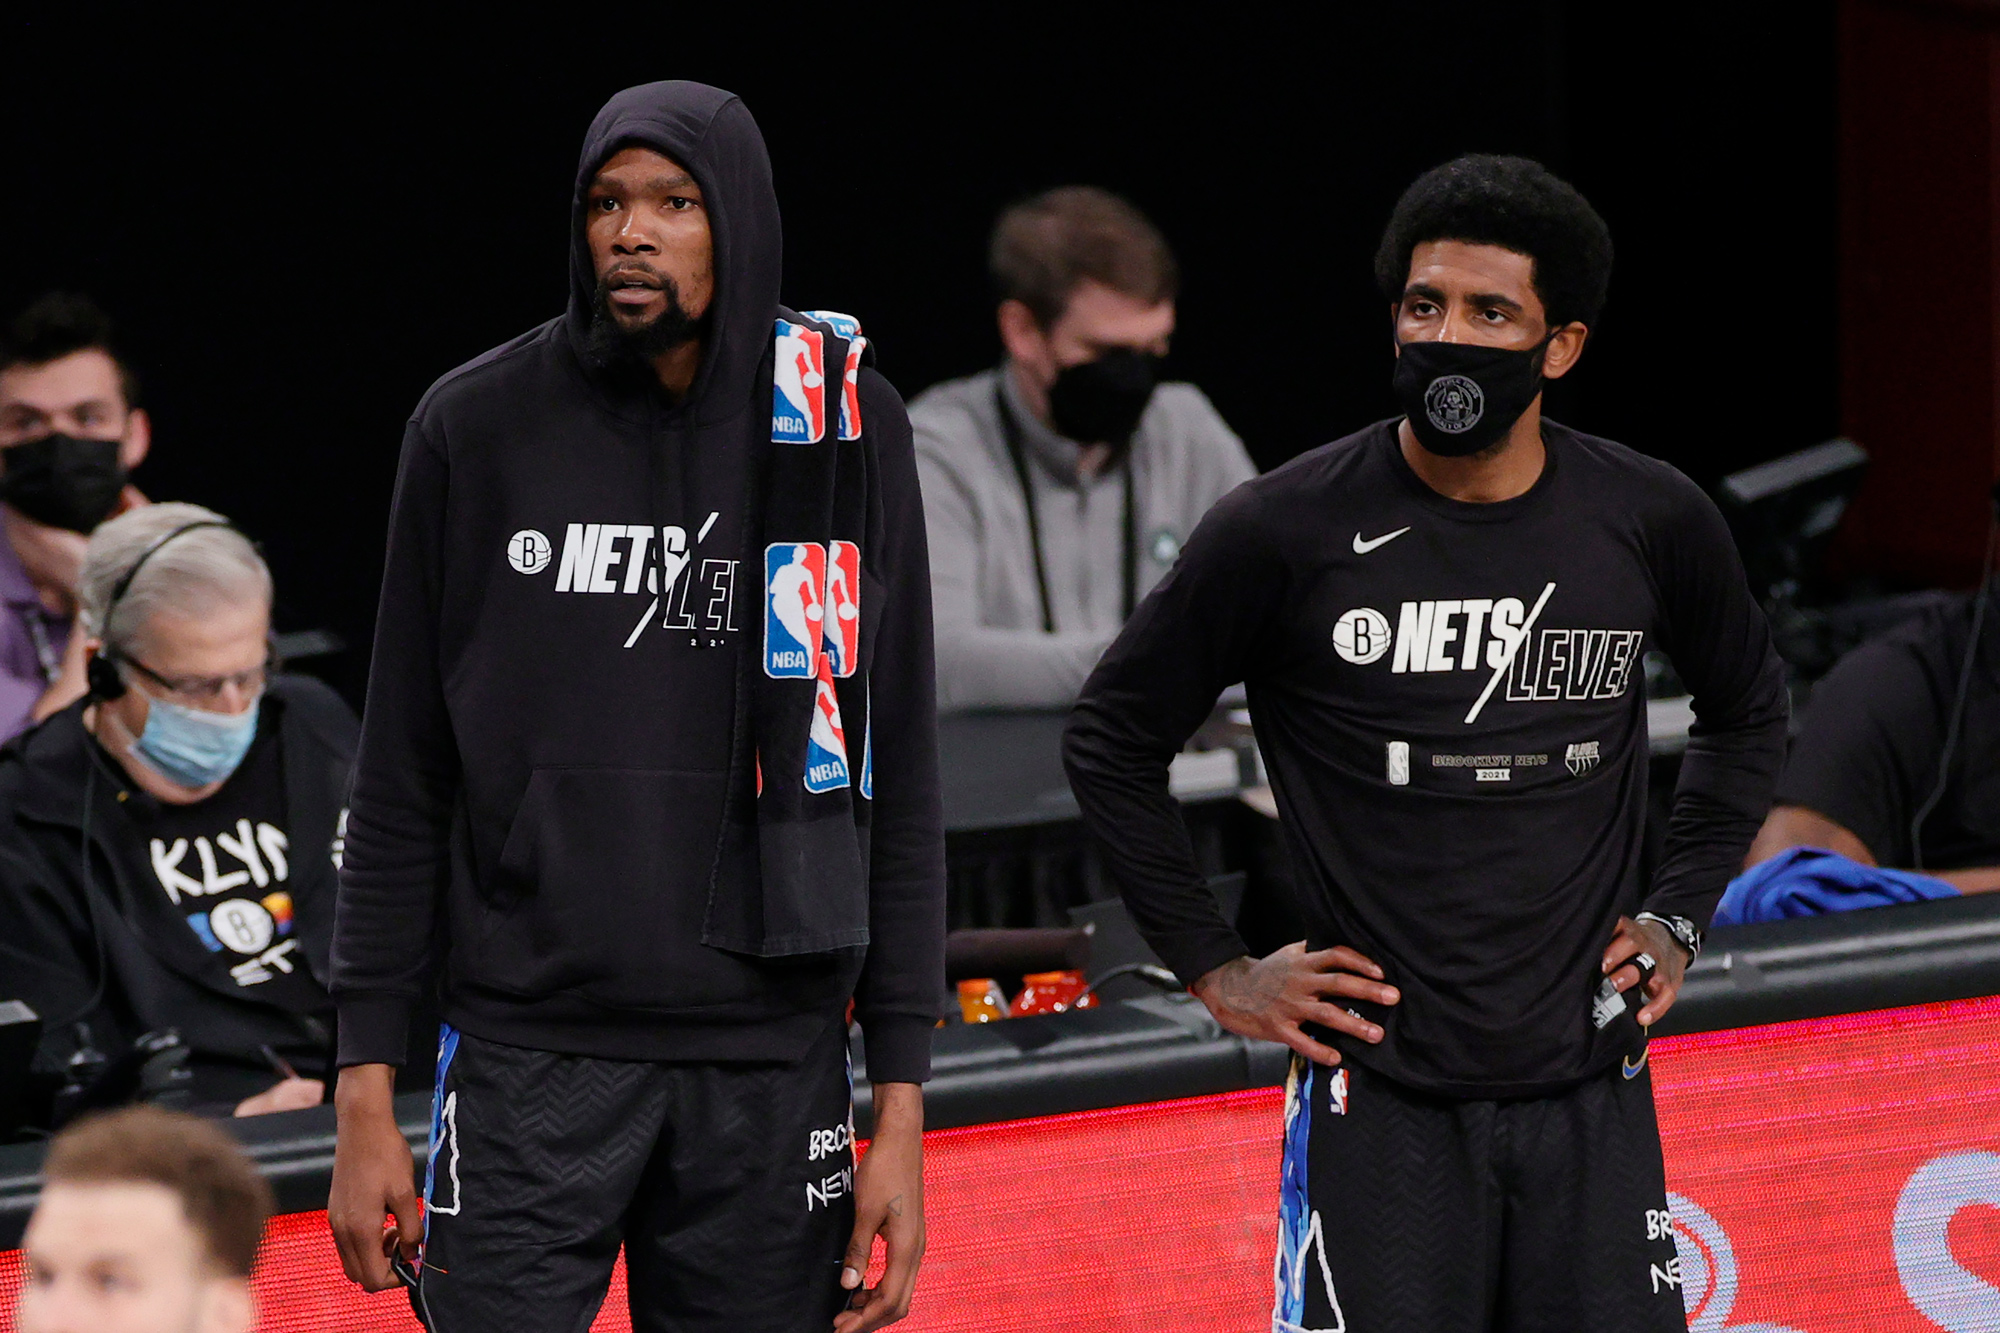 Kevin Durant, left, and Kyrie Irving of the Brooklyn Nets look on during a game at Barclays Center on June 1, in the Brooklyn borough of New York City.